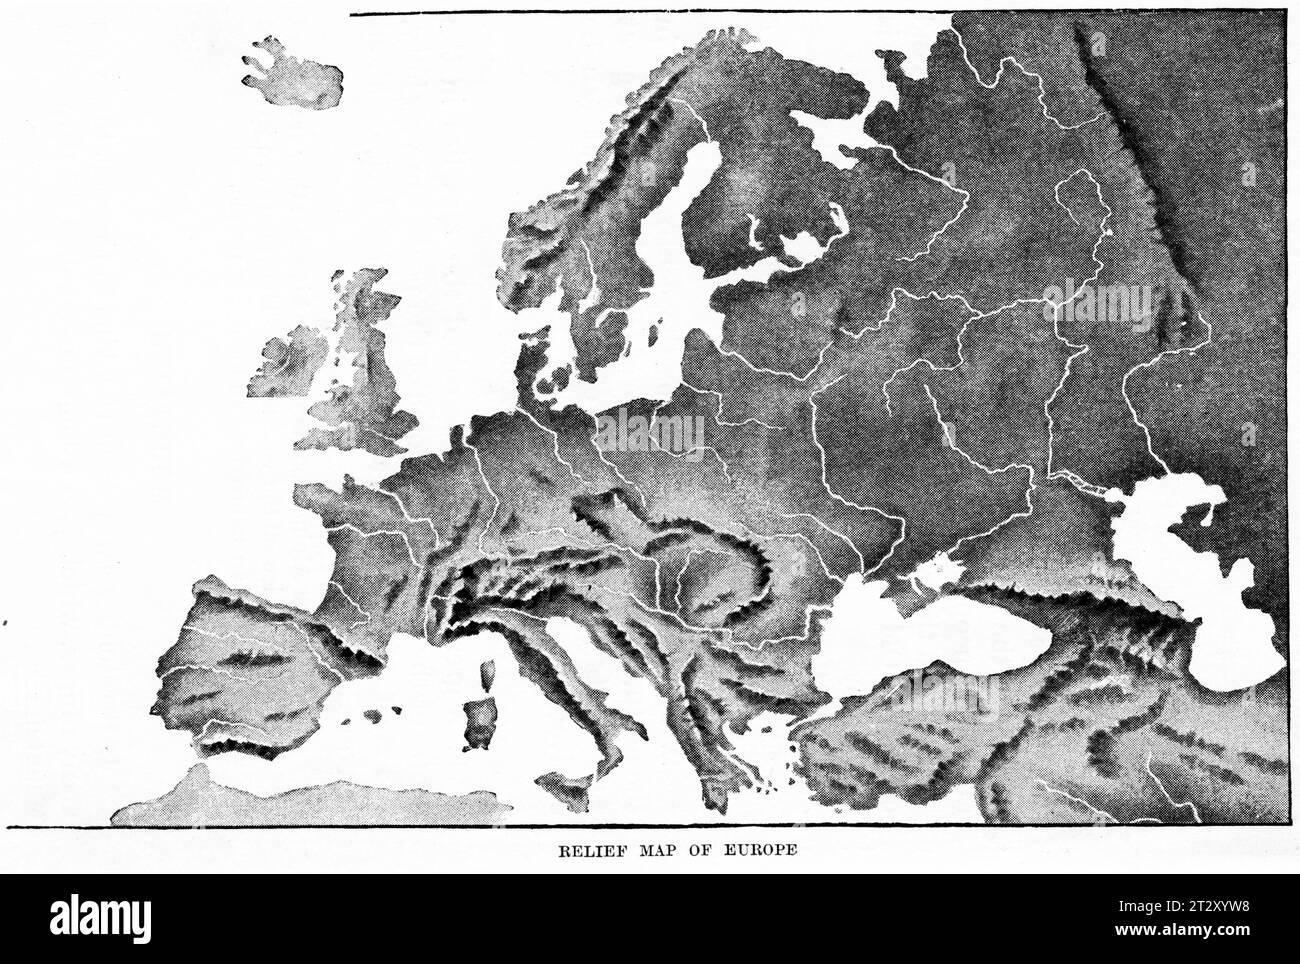 relief map of Europe circa 1910 from a school geography text book Stock Photo